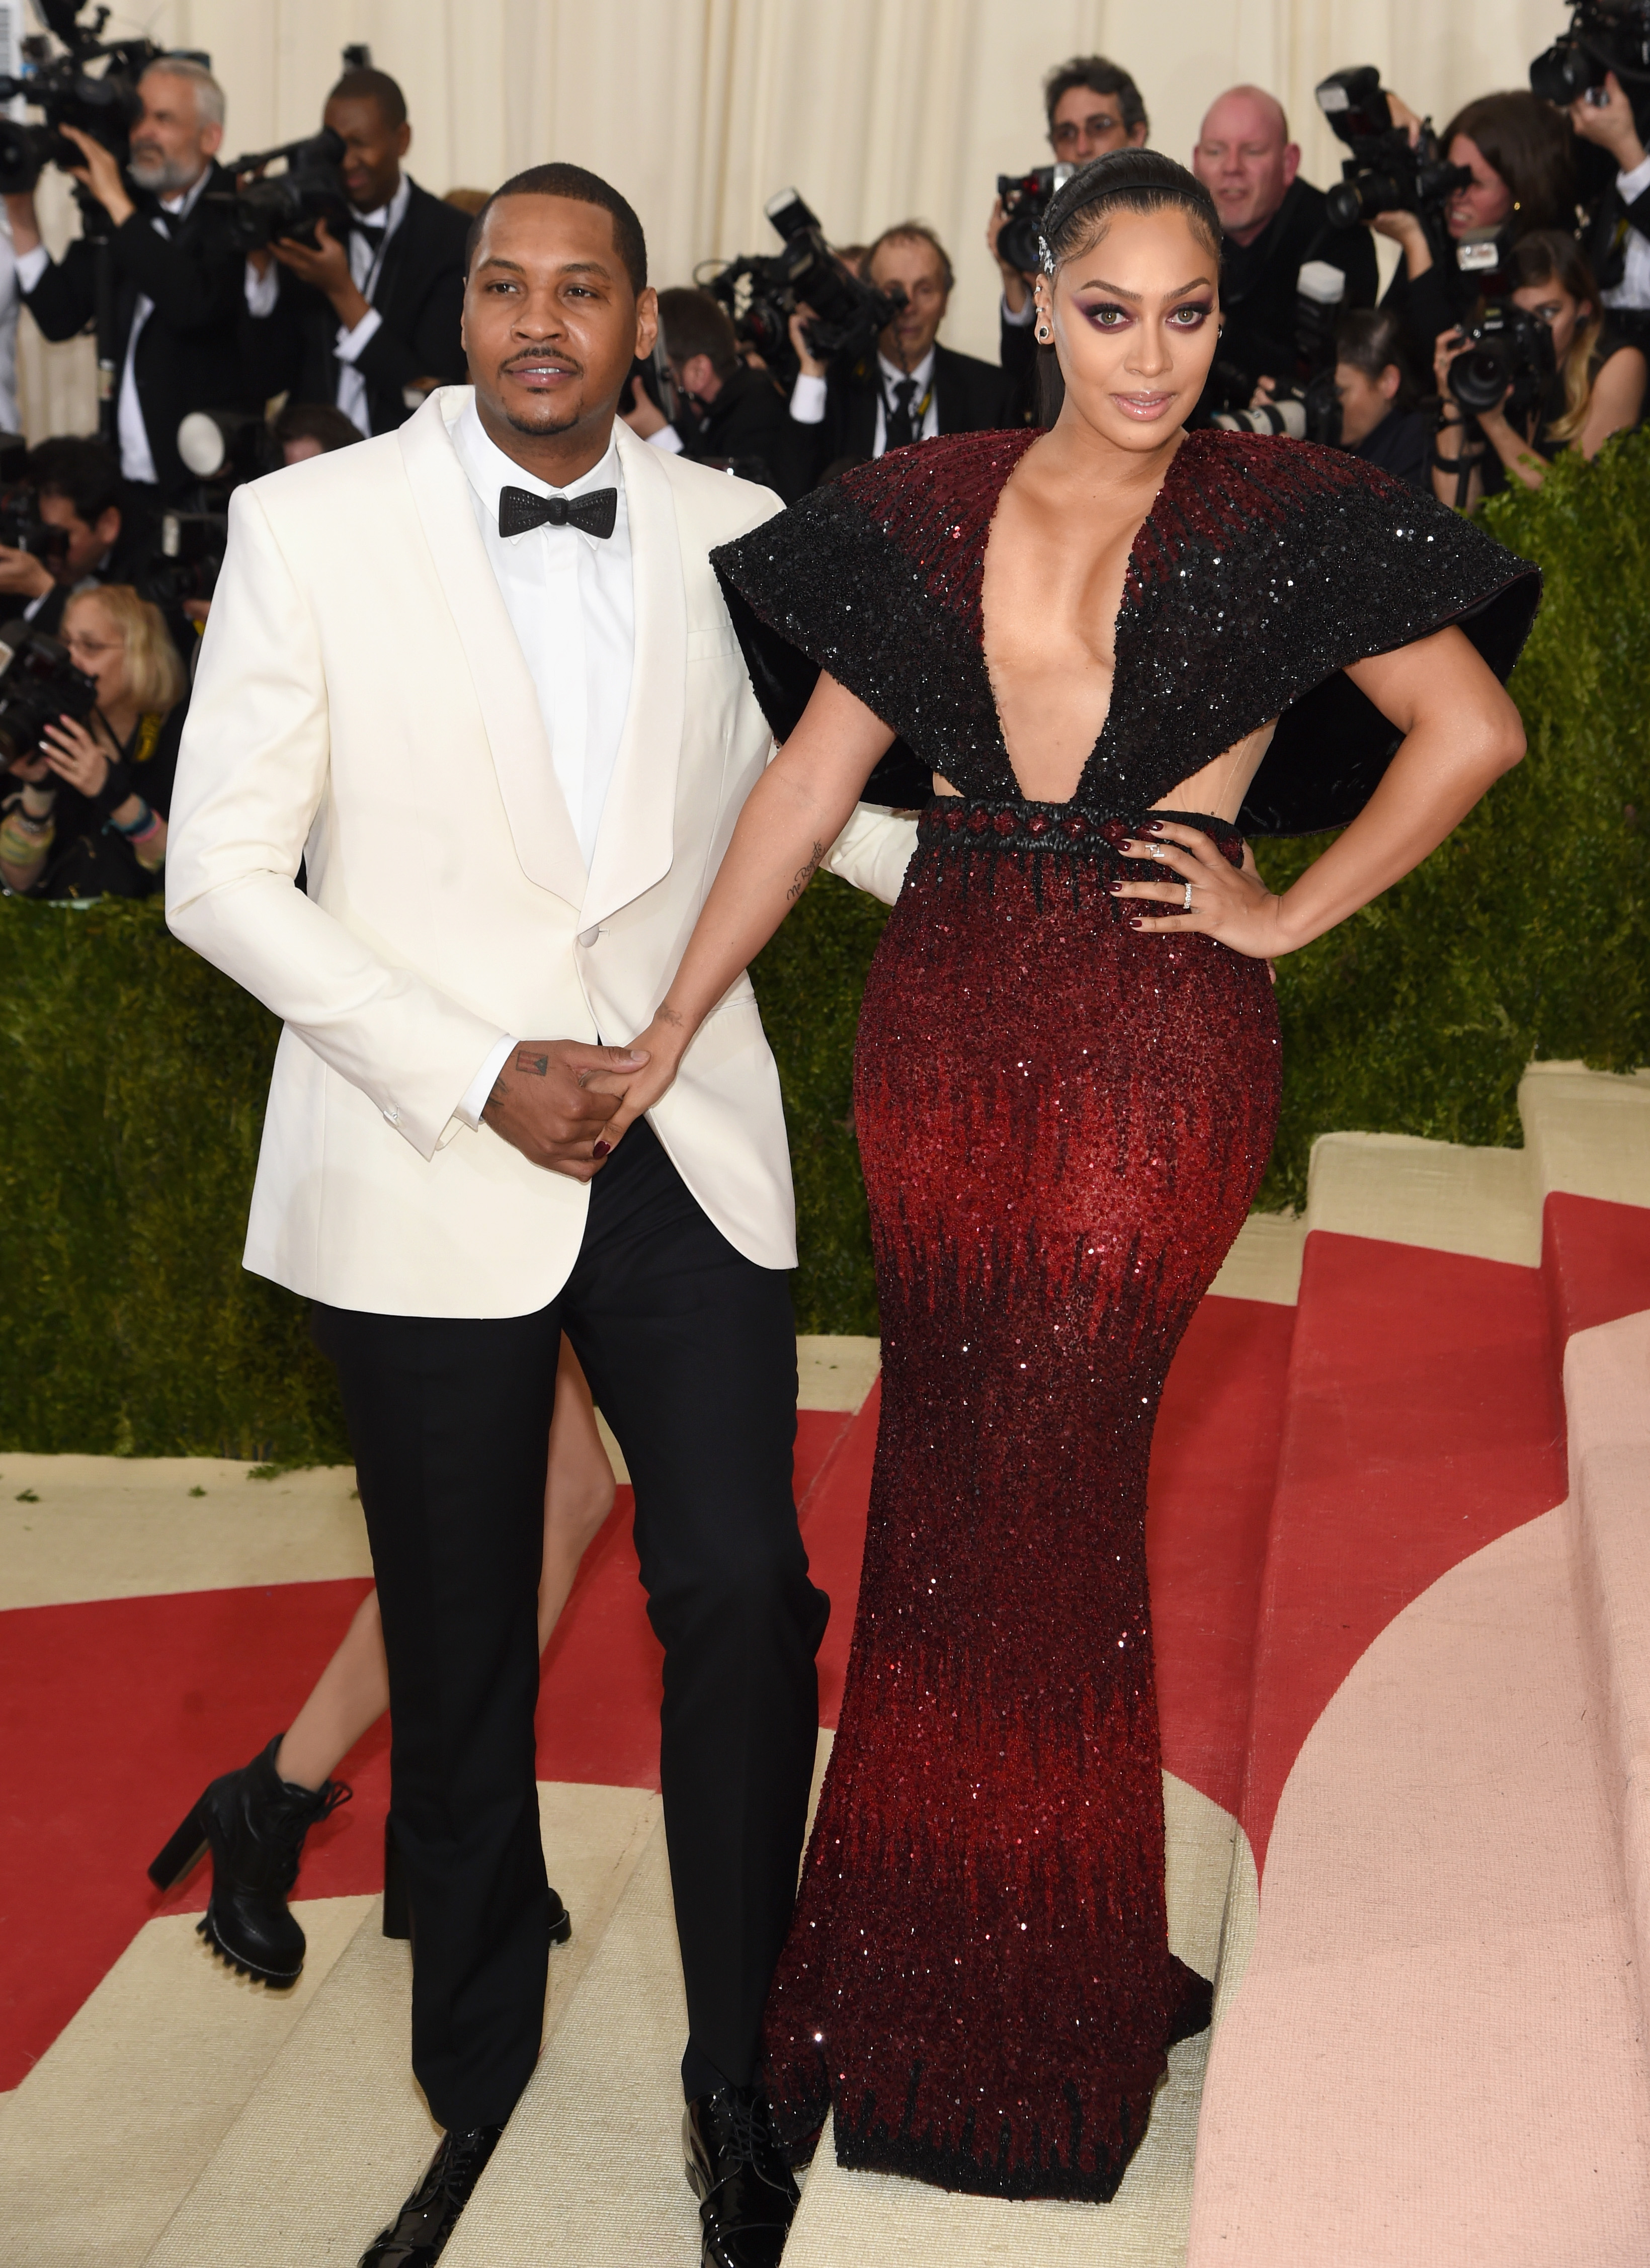 Carmelo Anthony and  La La Anthony attend  Manus x Machina: Fashion In An Age Of Technology  Costume Institute Gala at Metropolitan Museum of Art on May 2, 2016 in New York City.